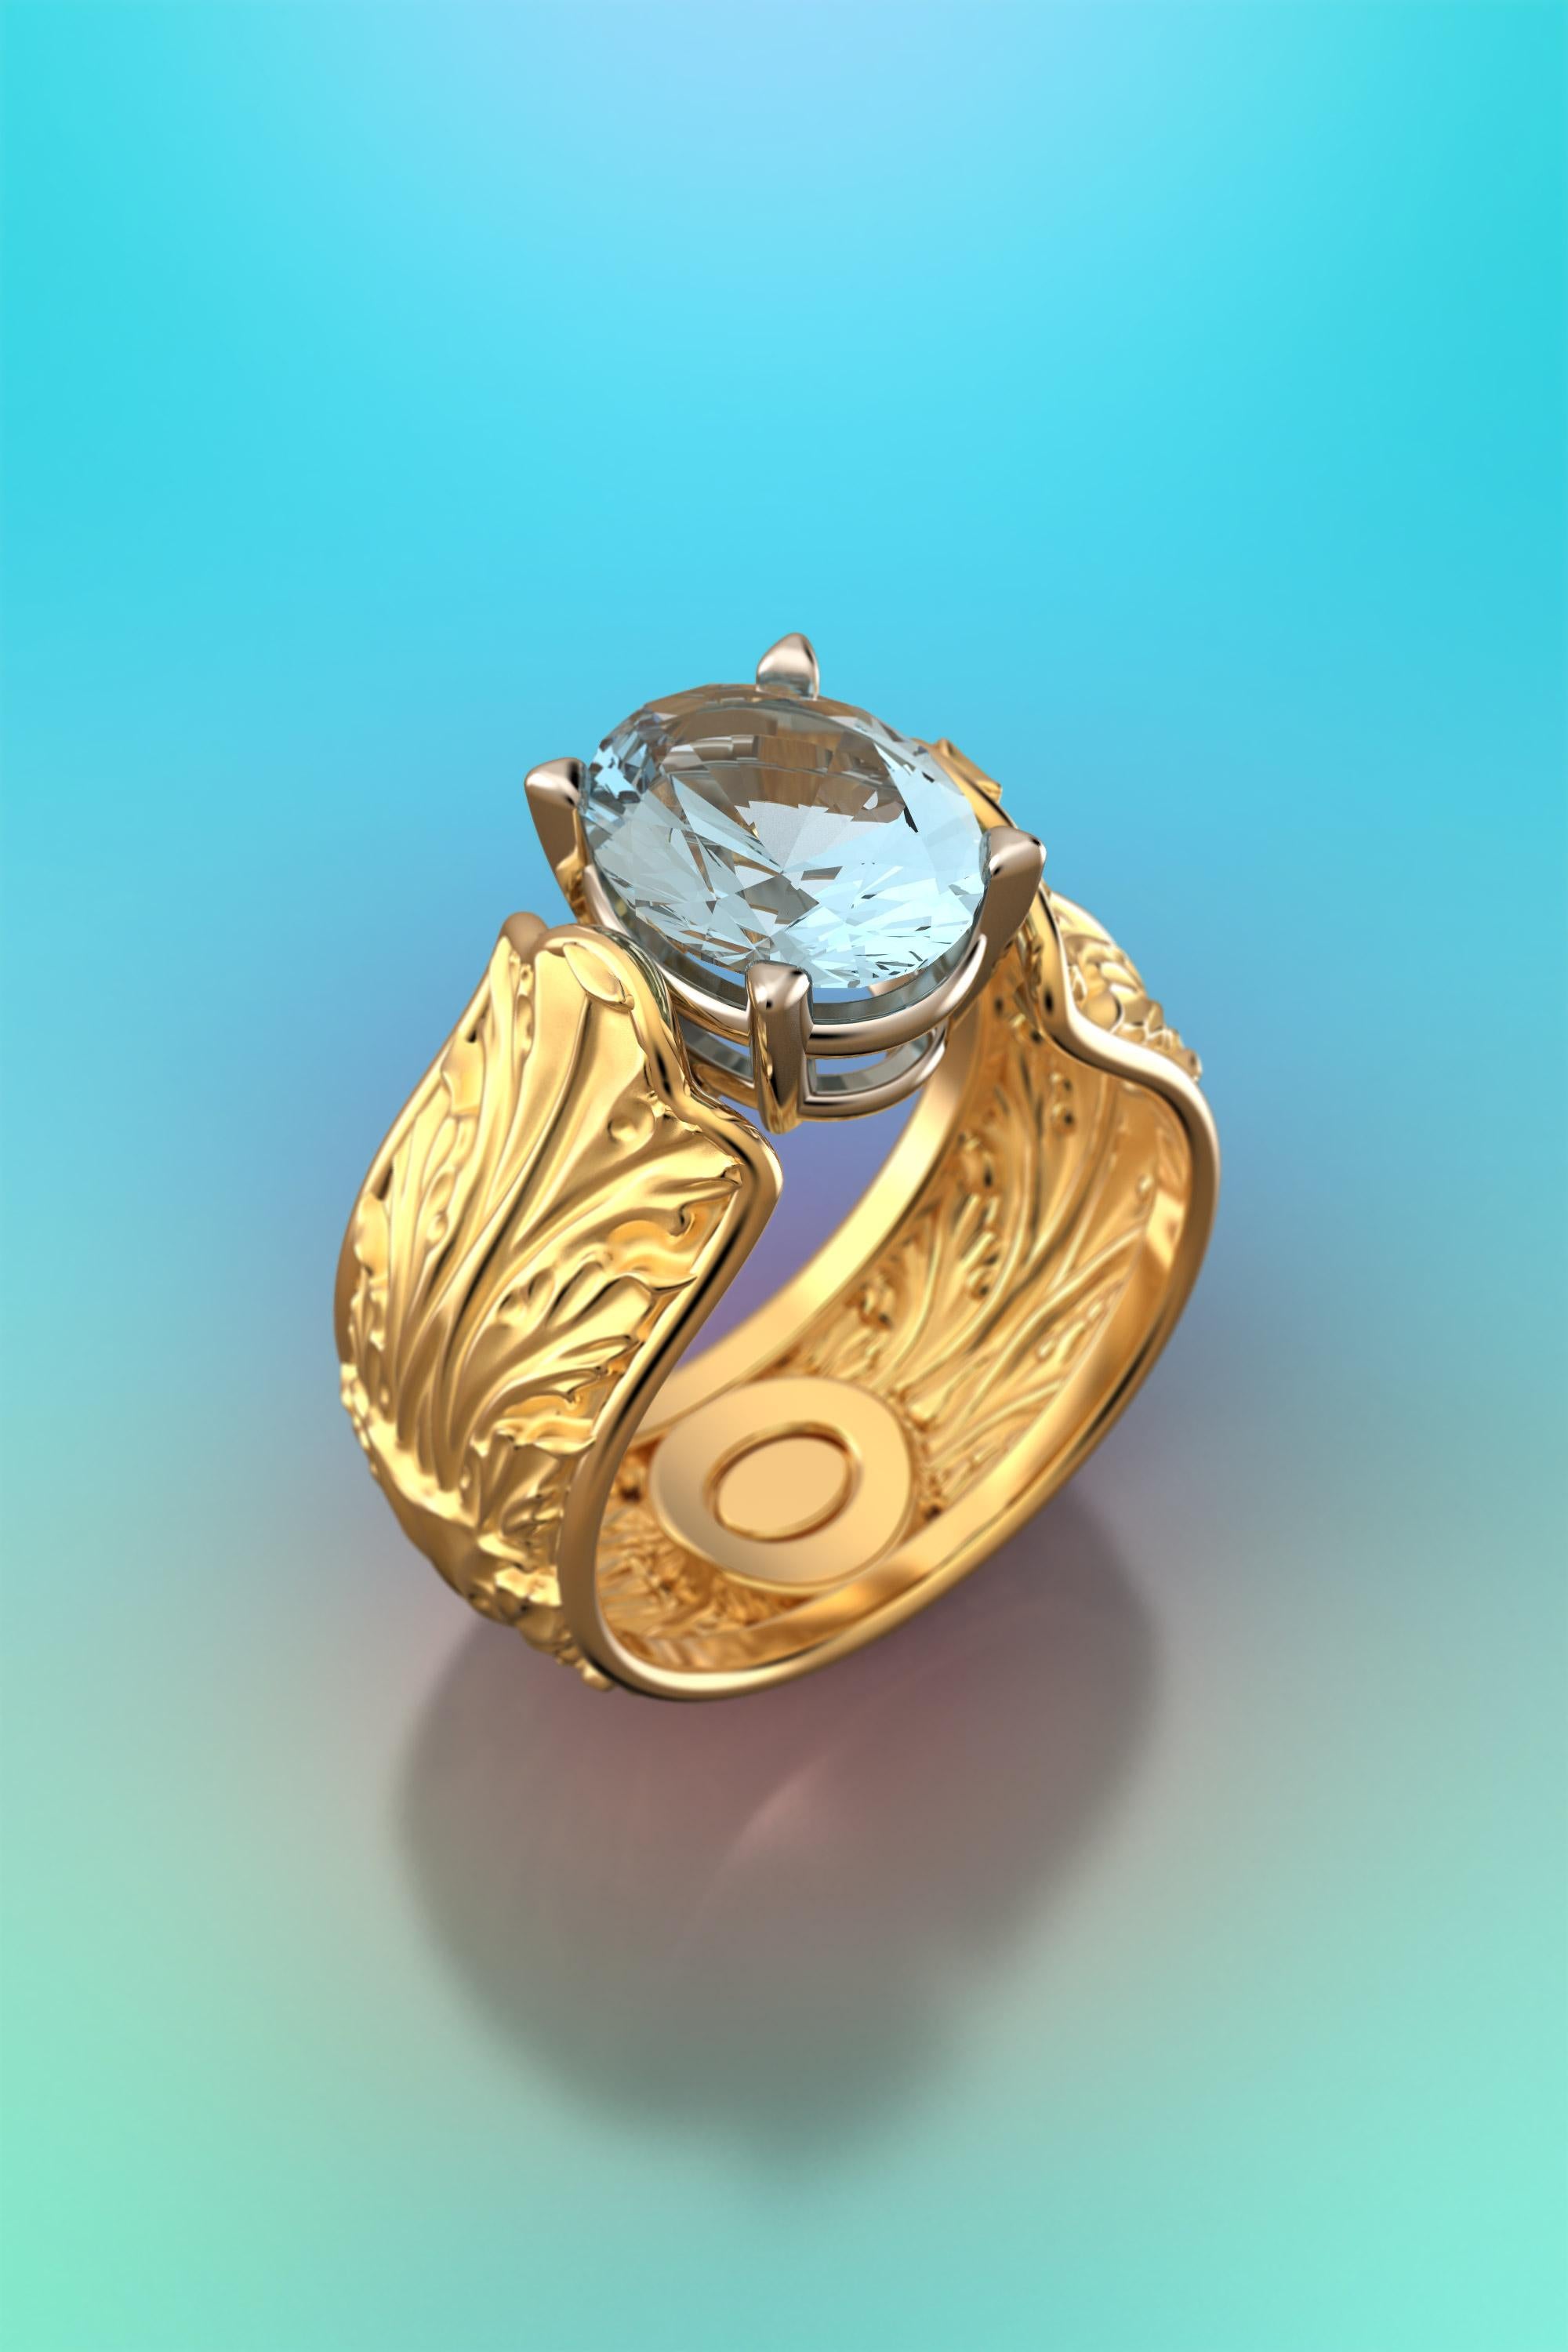 For Sale:  Baroque 14k Gold Ring with Natural Aquamarine Italian Fine Jewelry Made in Italy 2